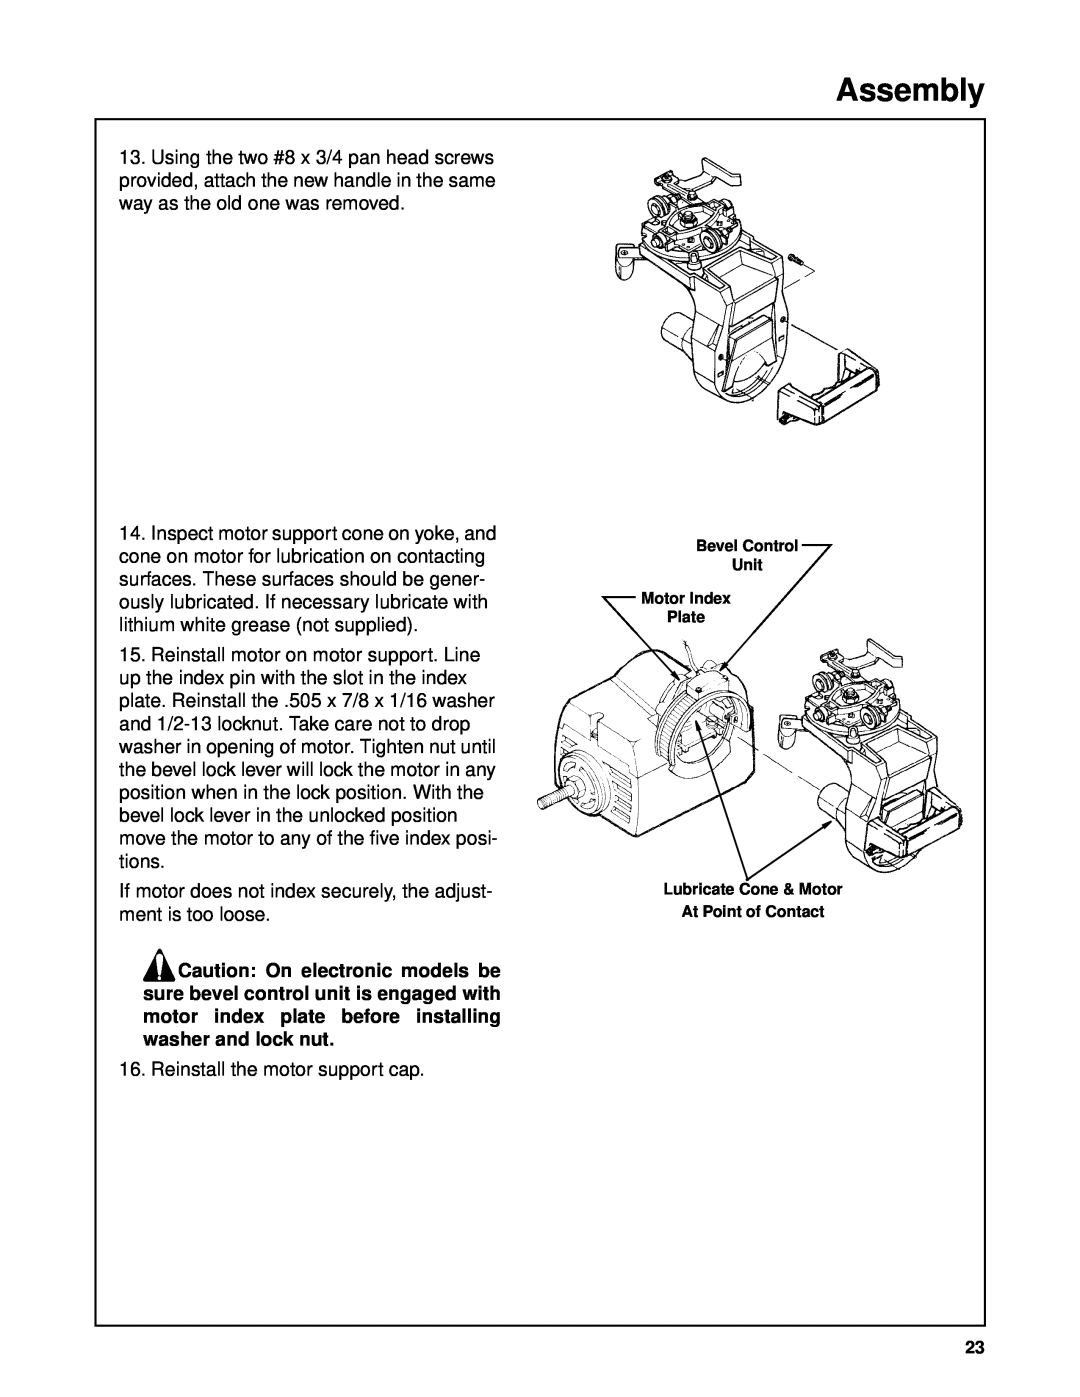 Craftsman 509398, 509399 owner manual Assembly, If motor does not index securely, the adjust- ment is too loose 